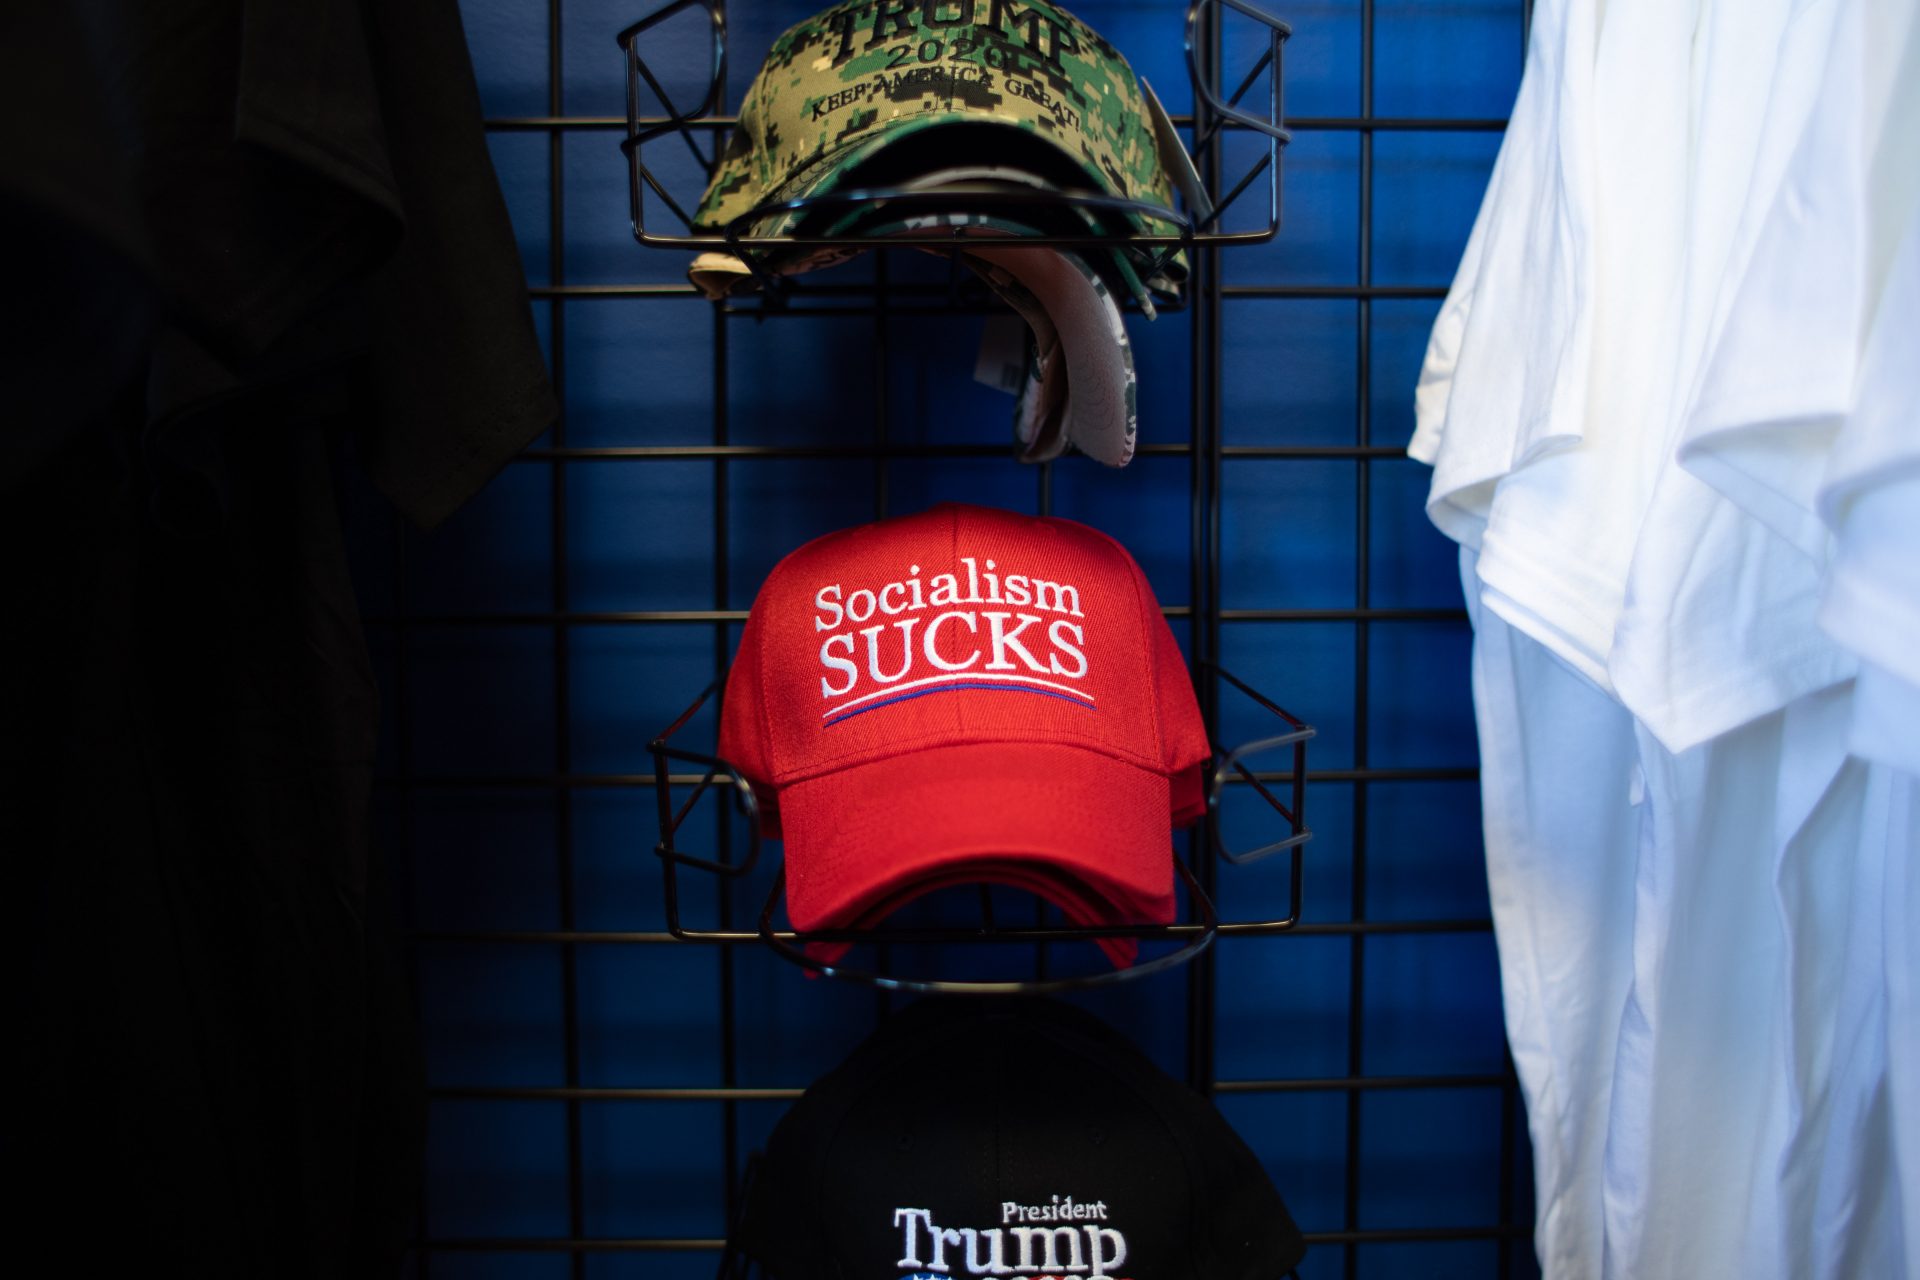 Merchandise for sale at Michael Domanico's "Trump Store" in Bensalem, PA includes baseball hats with phrases like "Socialism Sucks."